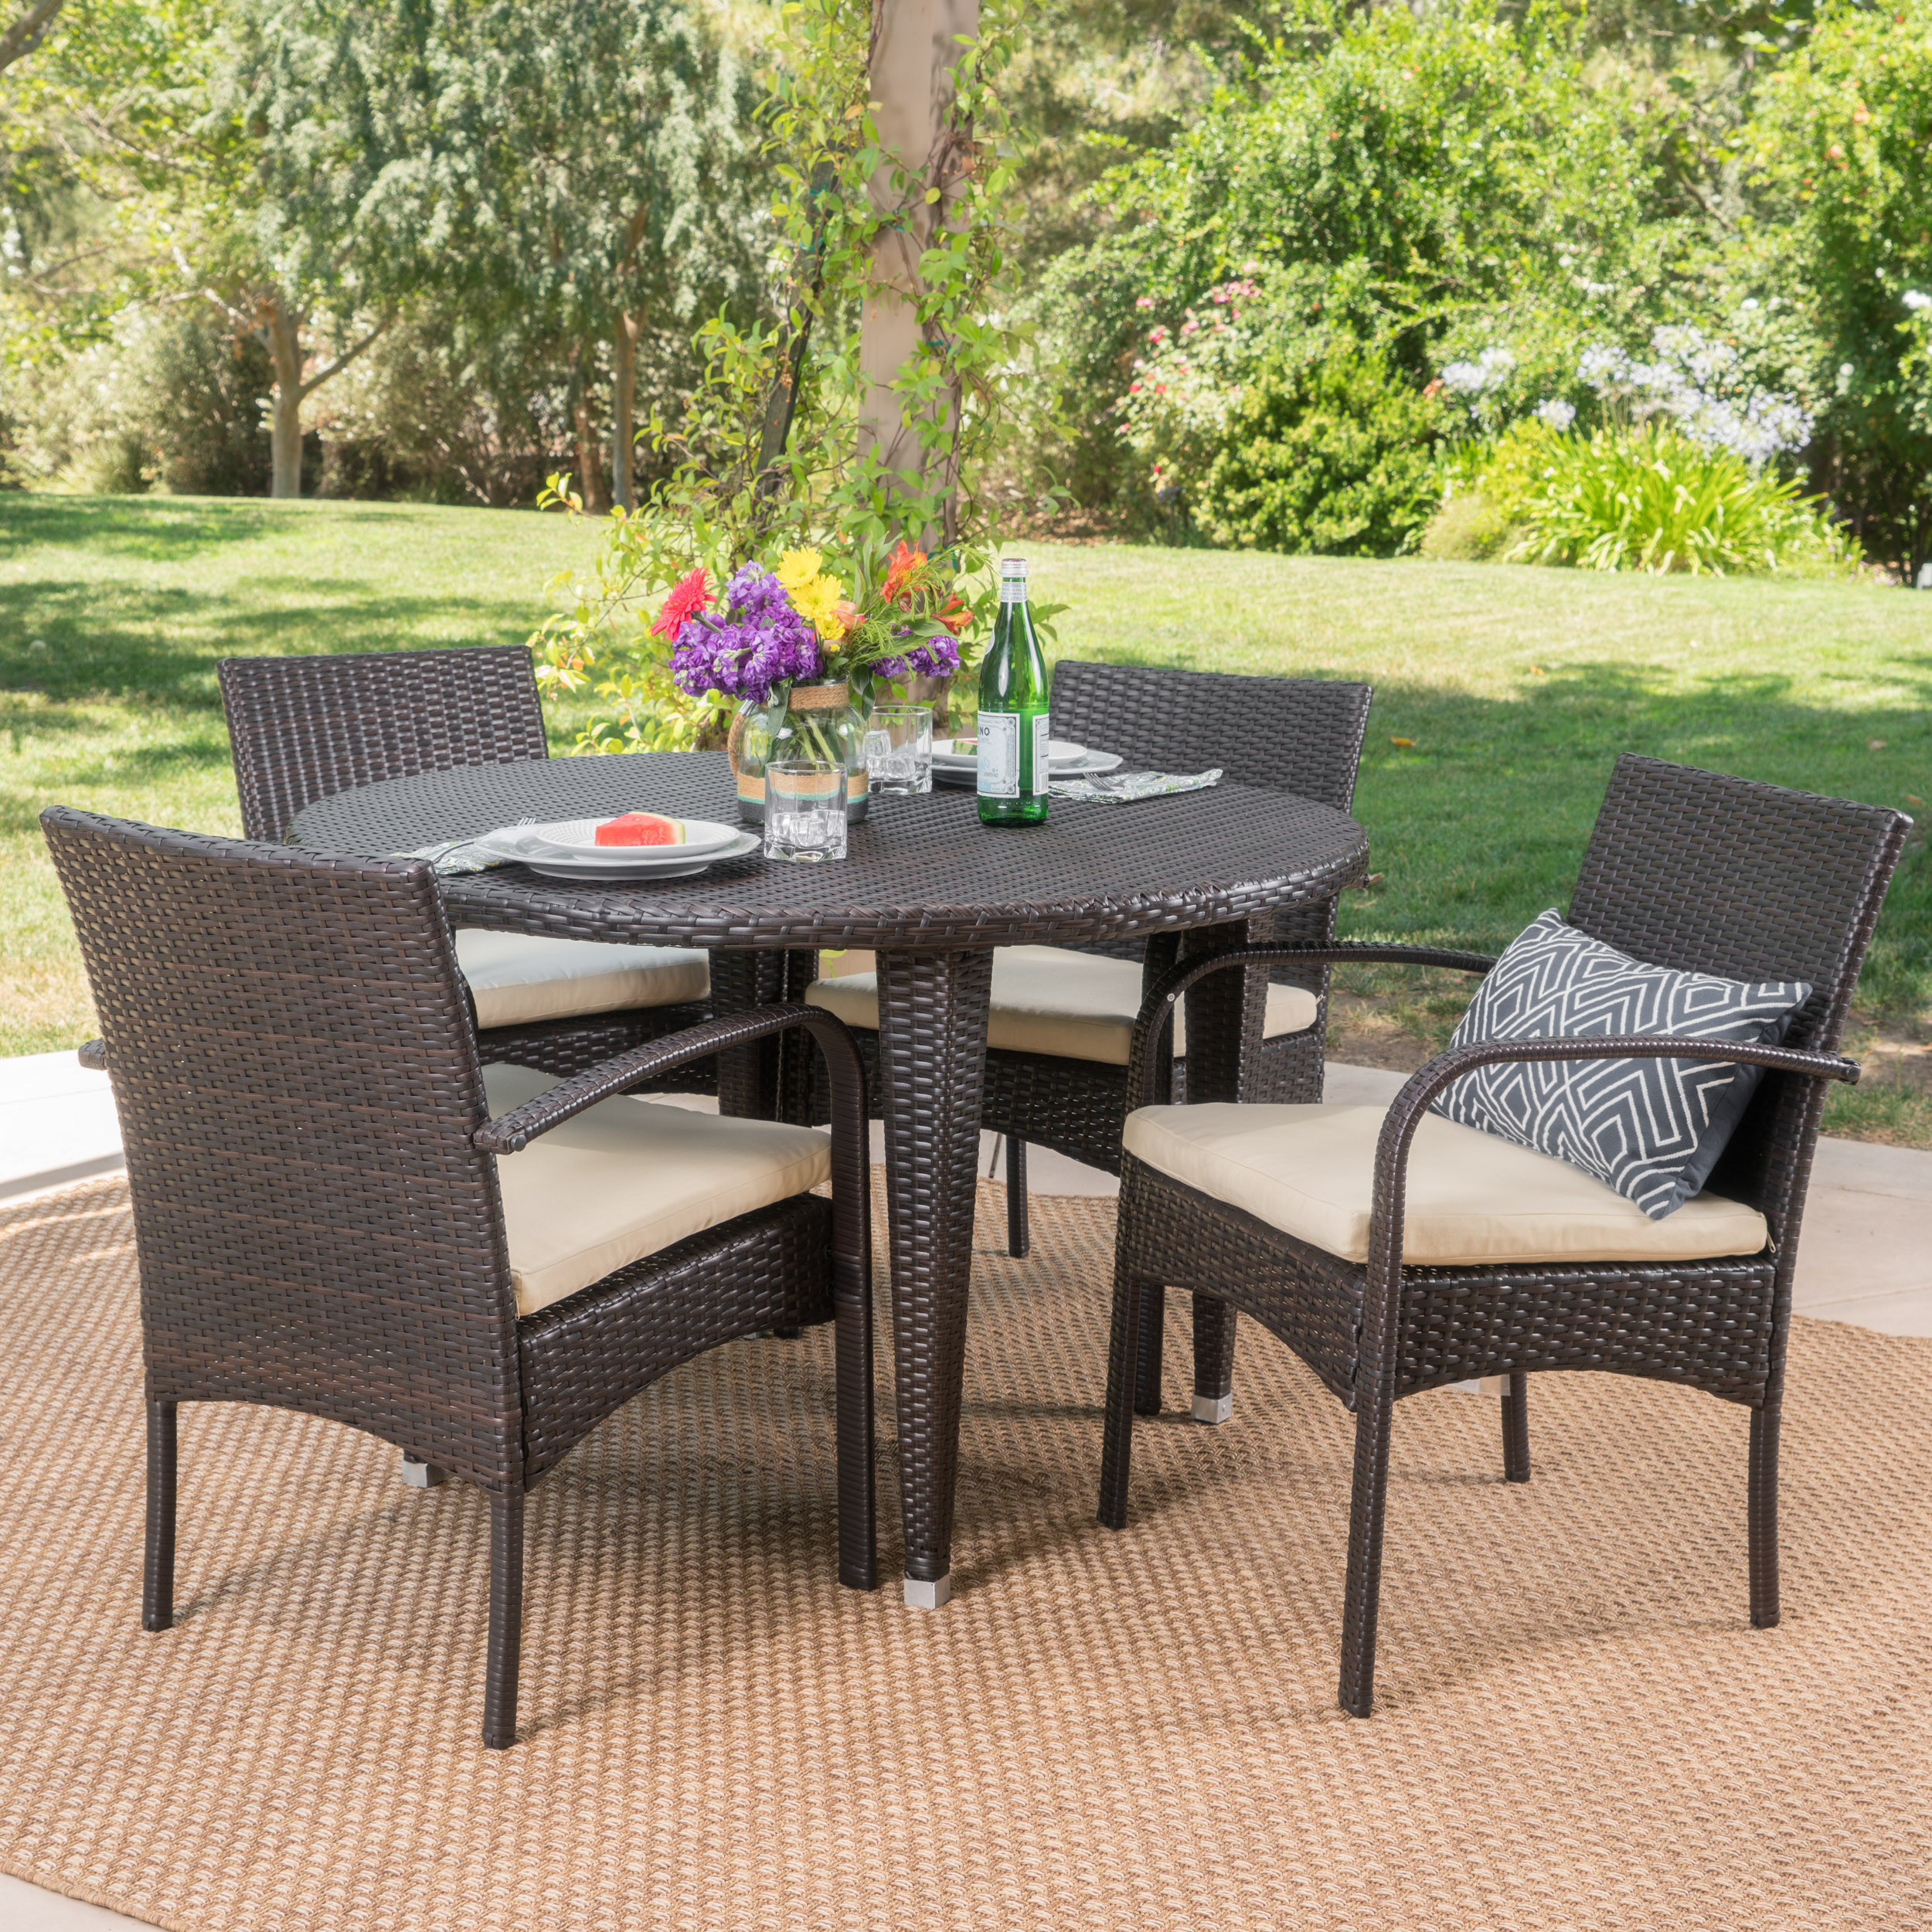 Cole Outdoor 5 Piece Wicker Circular Dining Set with Cushions, Multibrown, Crme - image 1 of 9